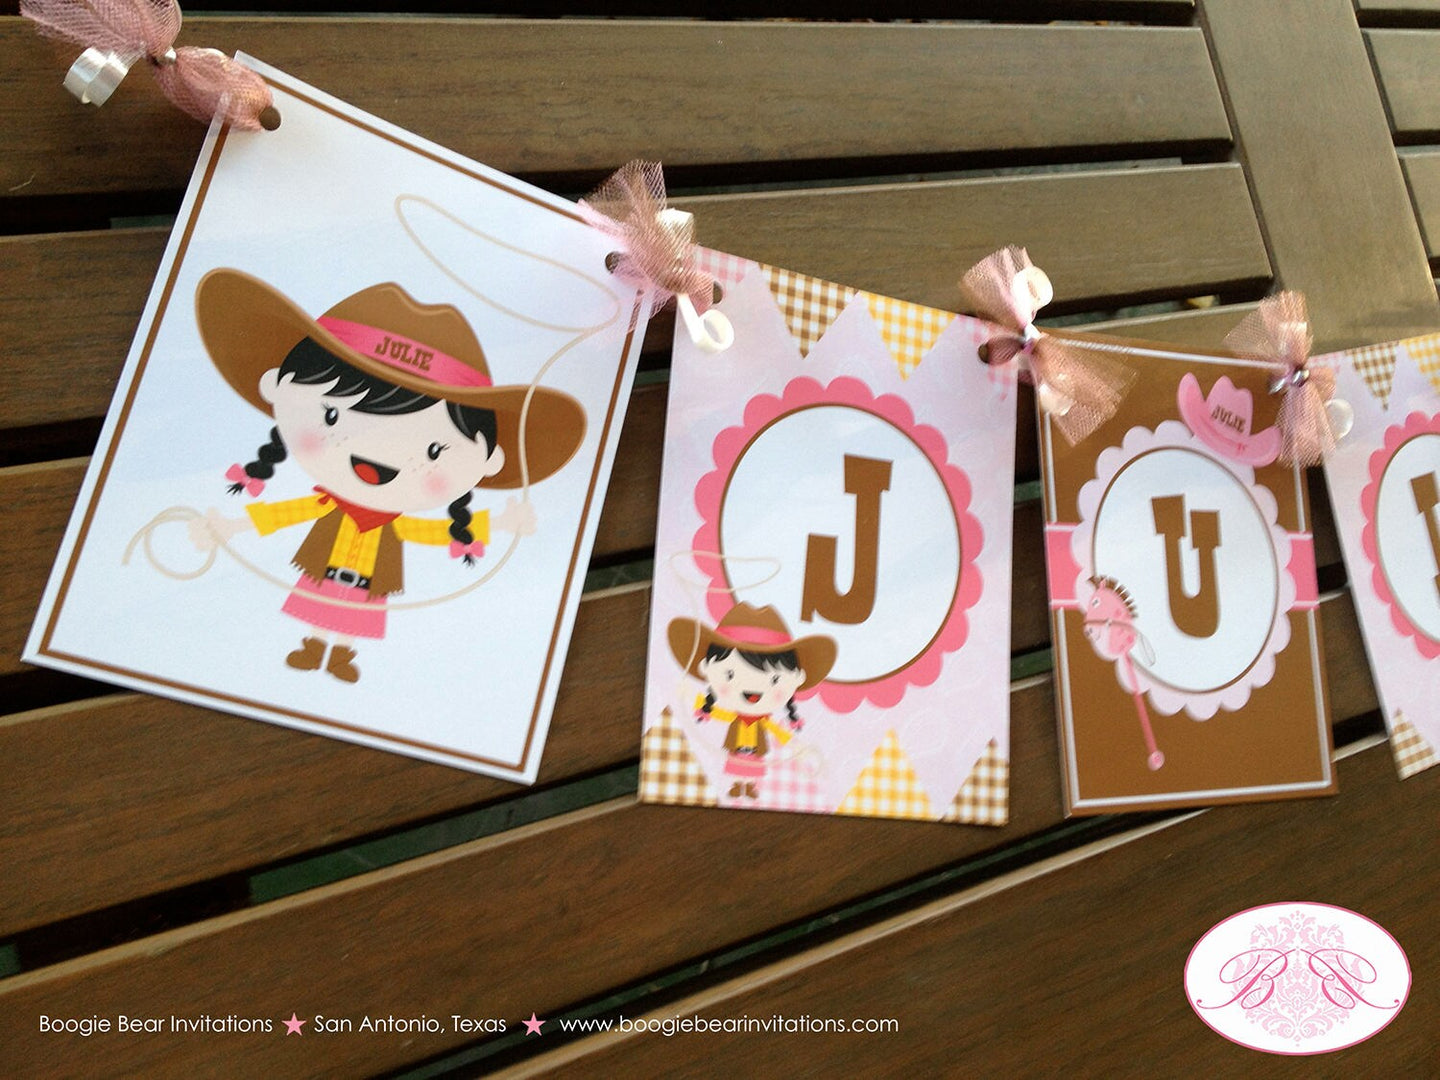 Cowgirl Birthday Party Name Banner Pink Girl Western Ranch Pony Horse Lasso Brown Hat Boots Farm Country Boogie Bear Invitation Julie Theme